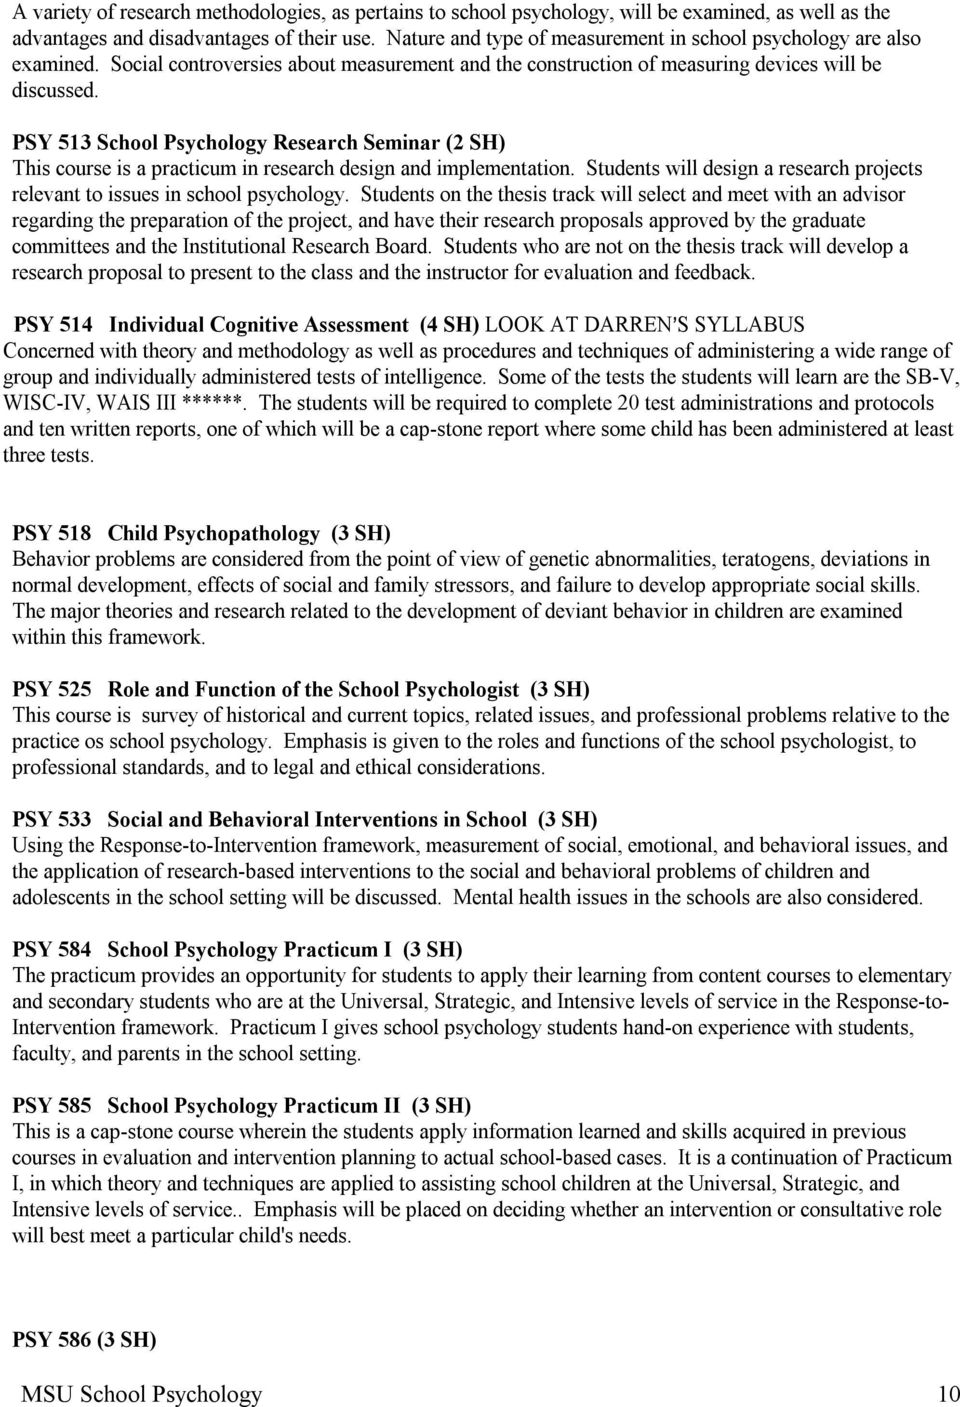 PSY 513 School Psychology Research Seminar (2 SH) This course is a practicum in research design and implementation. Students will design a research projects relevant to issues in school psychology.